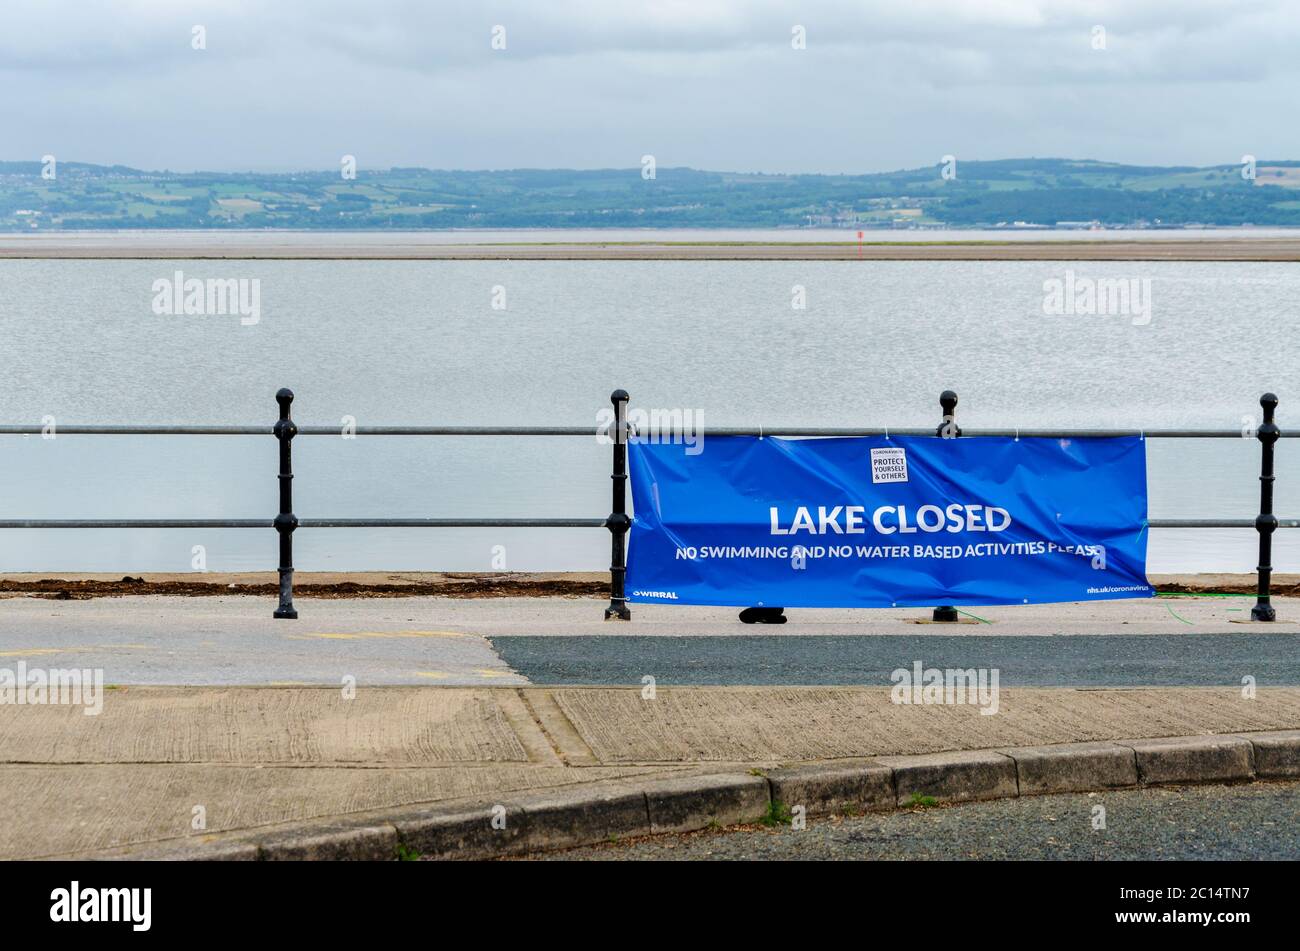 West Kirby, UK: Jun 3, 2020: A sign at Marine Lake advises that the lake is closed and no swimming or water based activities should take place Stock Photo